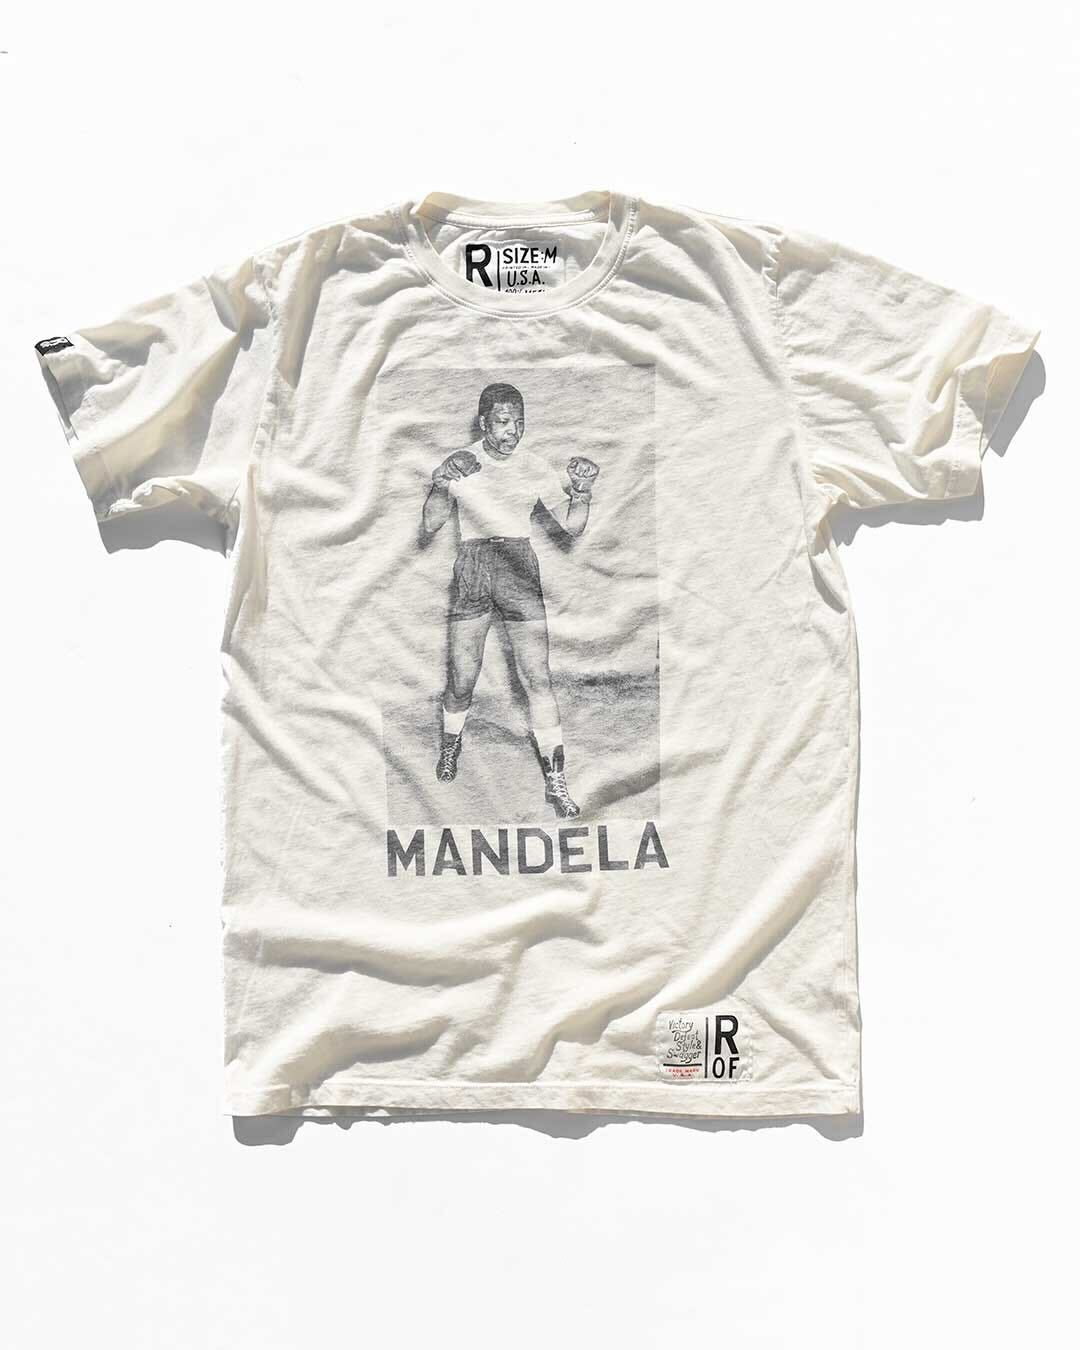 Nelson Mandela Photo Tee - Roots of Fight Canada